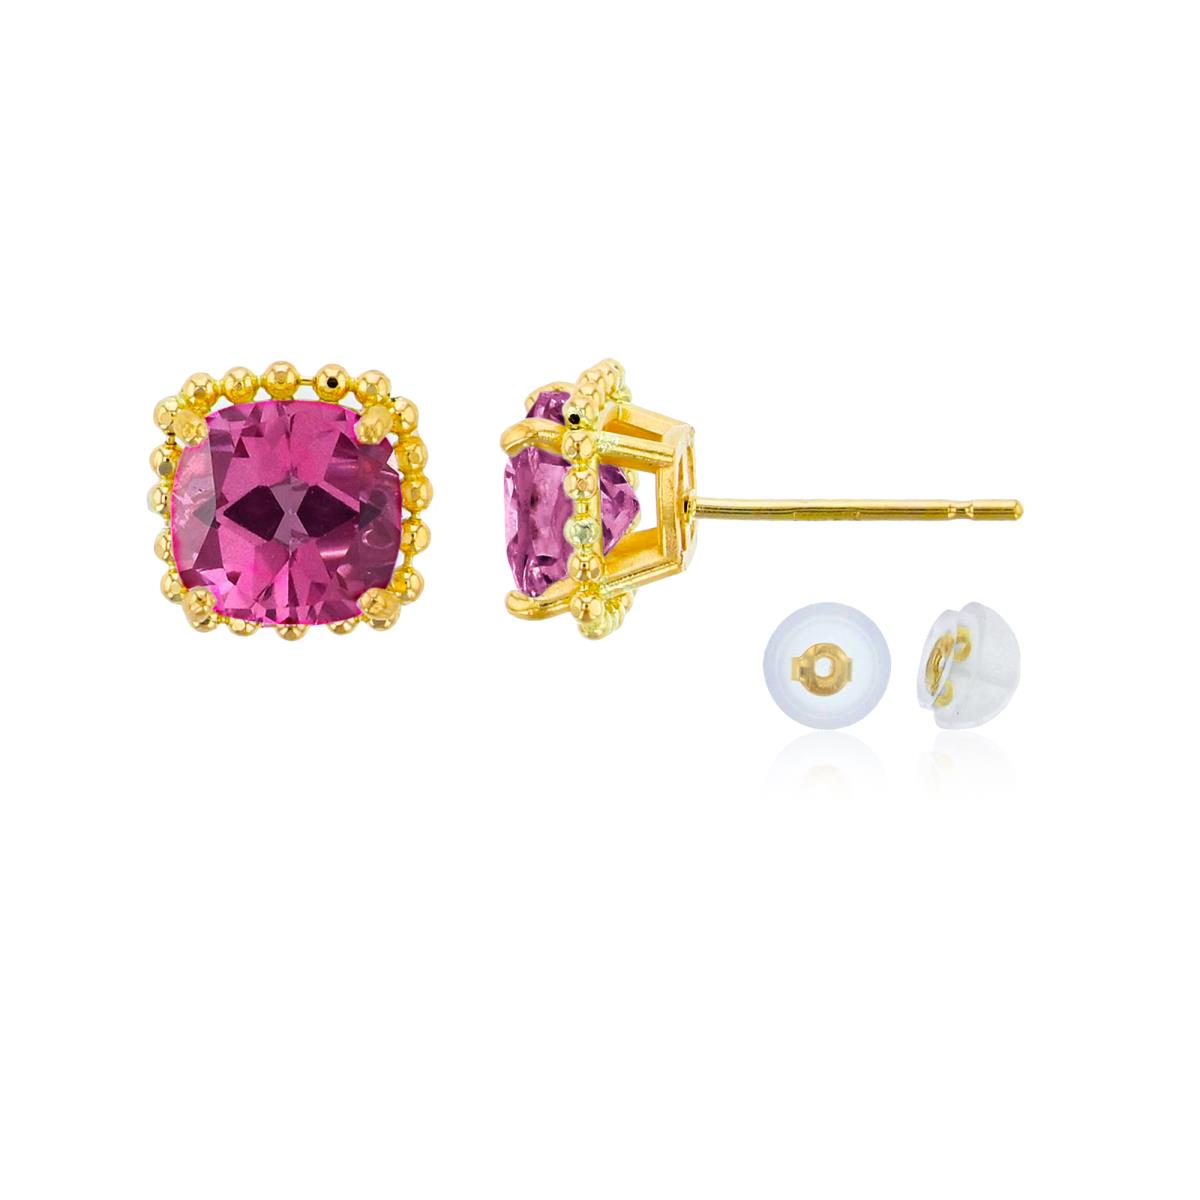 10K Yellow Gold 6x6mm Cushion Cut Pure Pink Bead Frame Stud Earring with Silicone Back